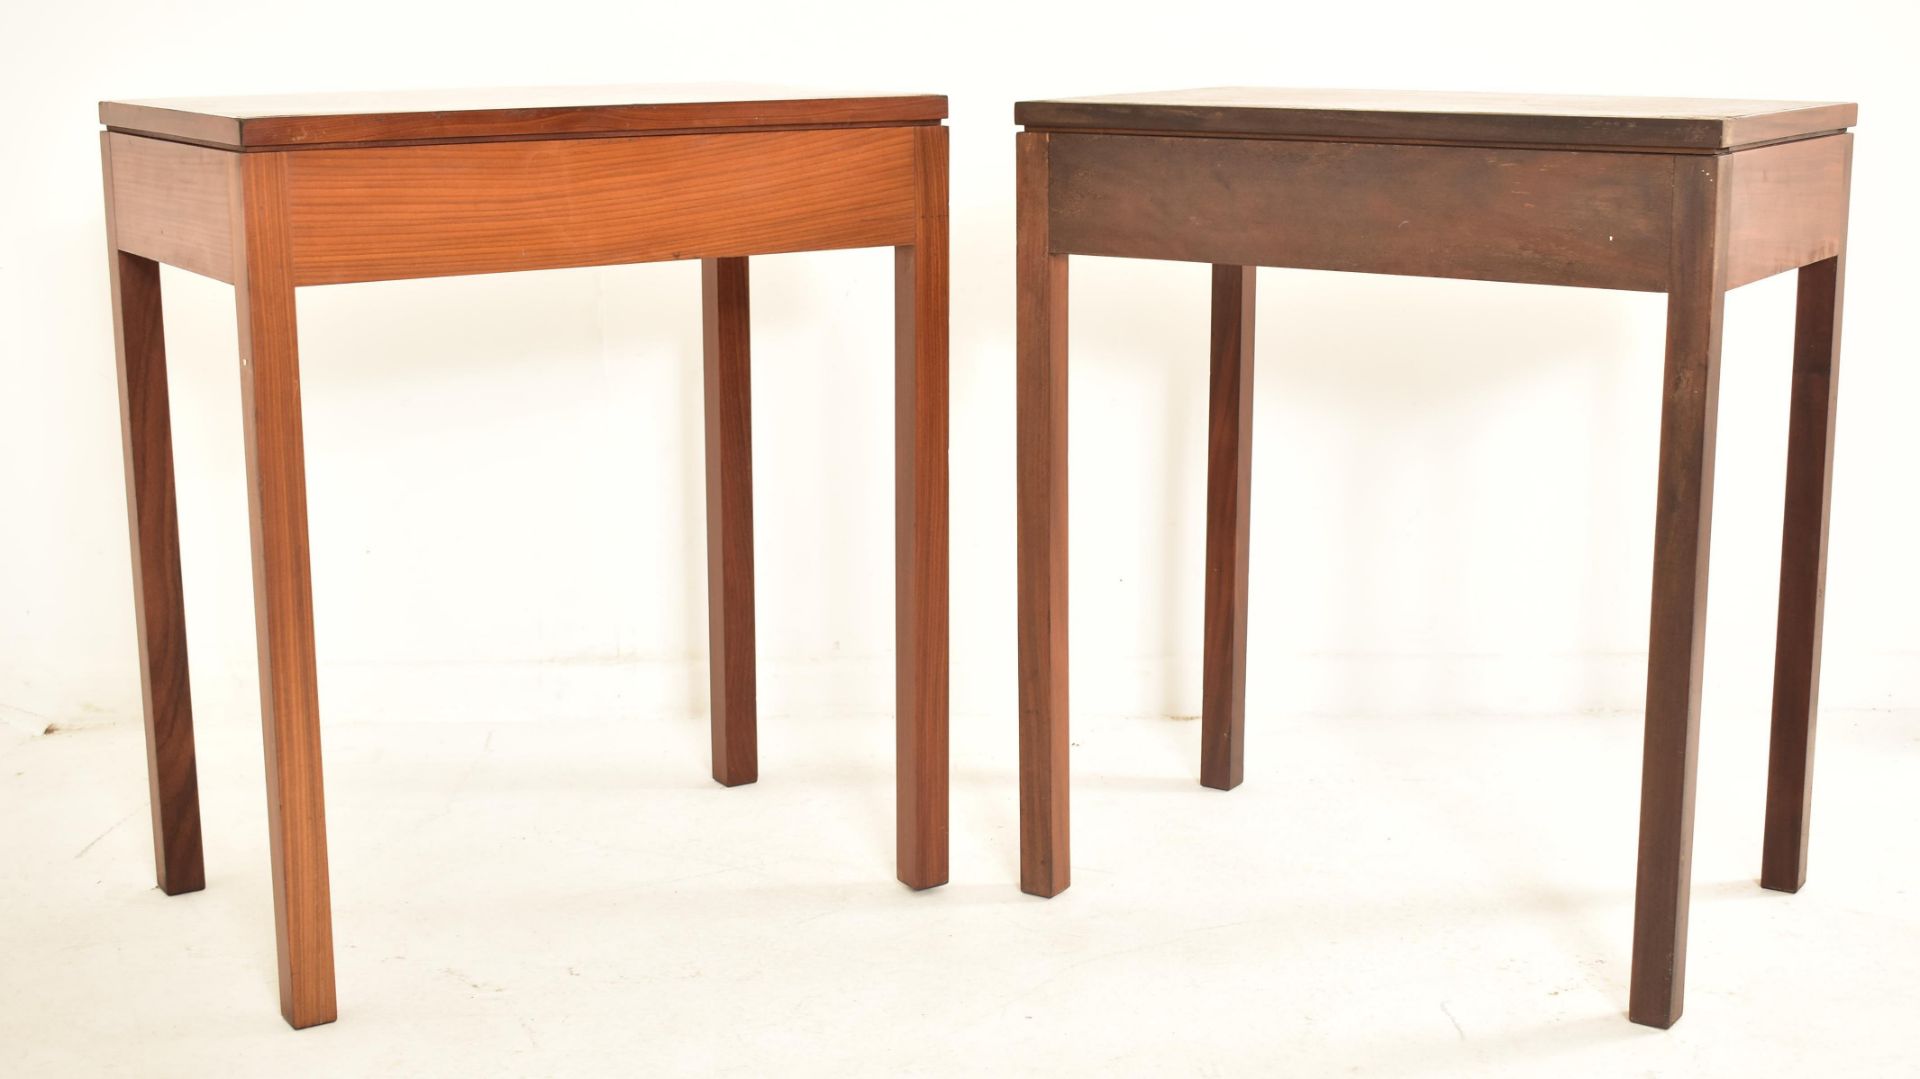 BRITISH MODERN DESIGN - PAIR TEAK OCCASSIONAL SIDE TABLES - Image 4 of 4